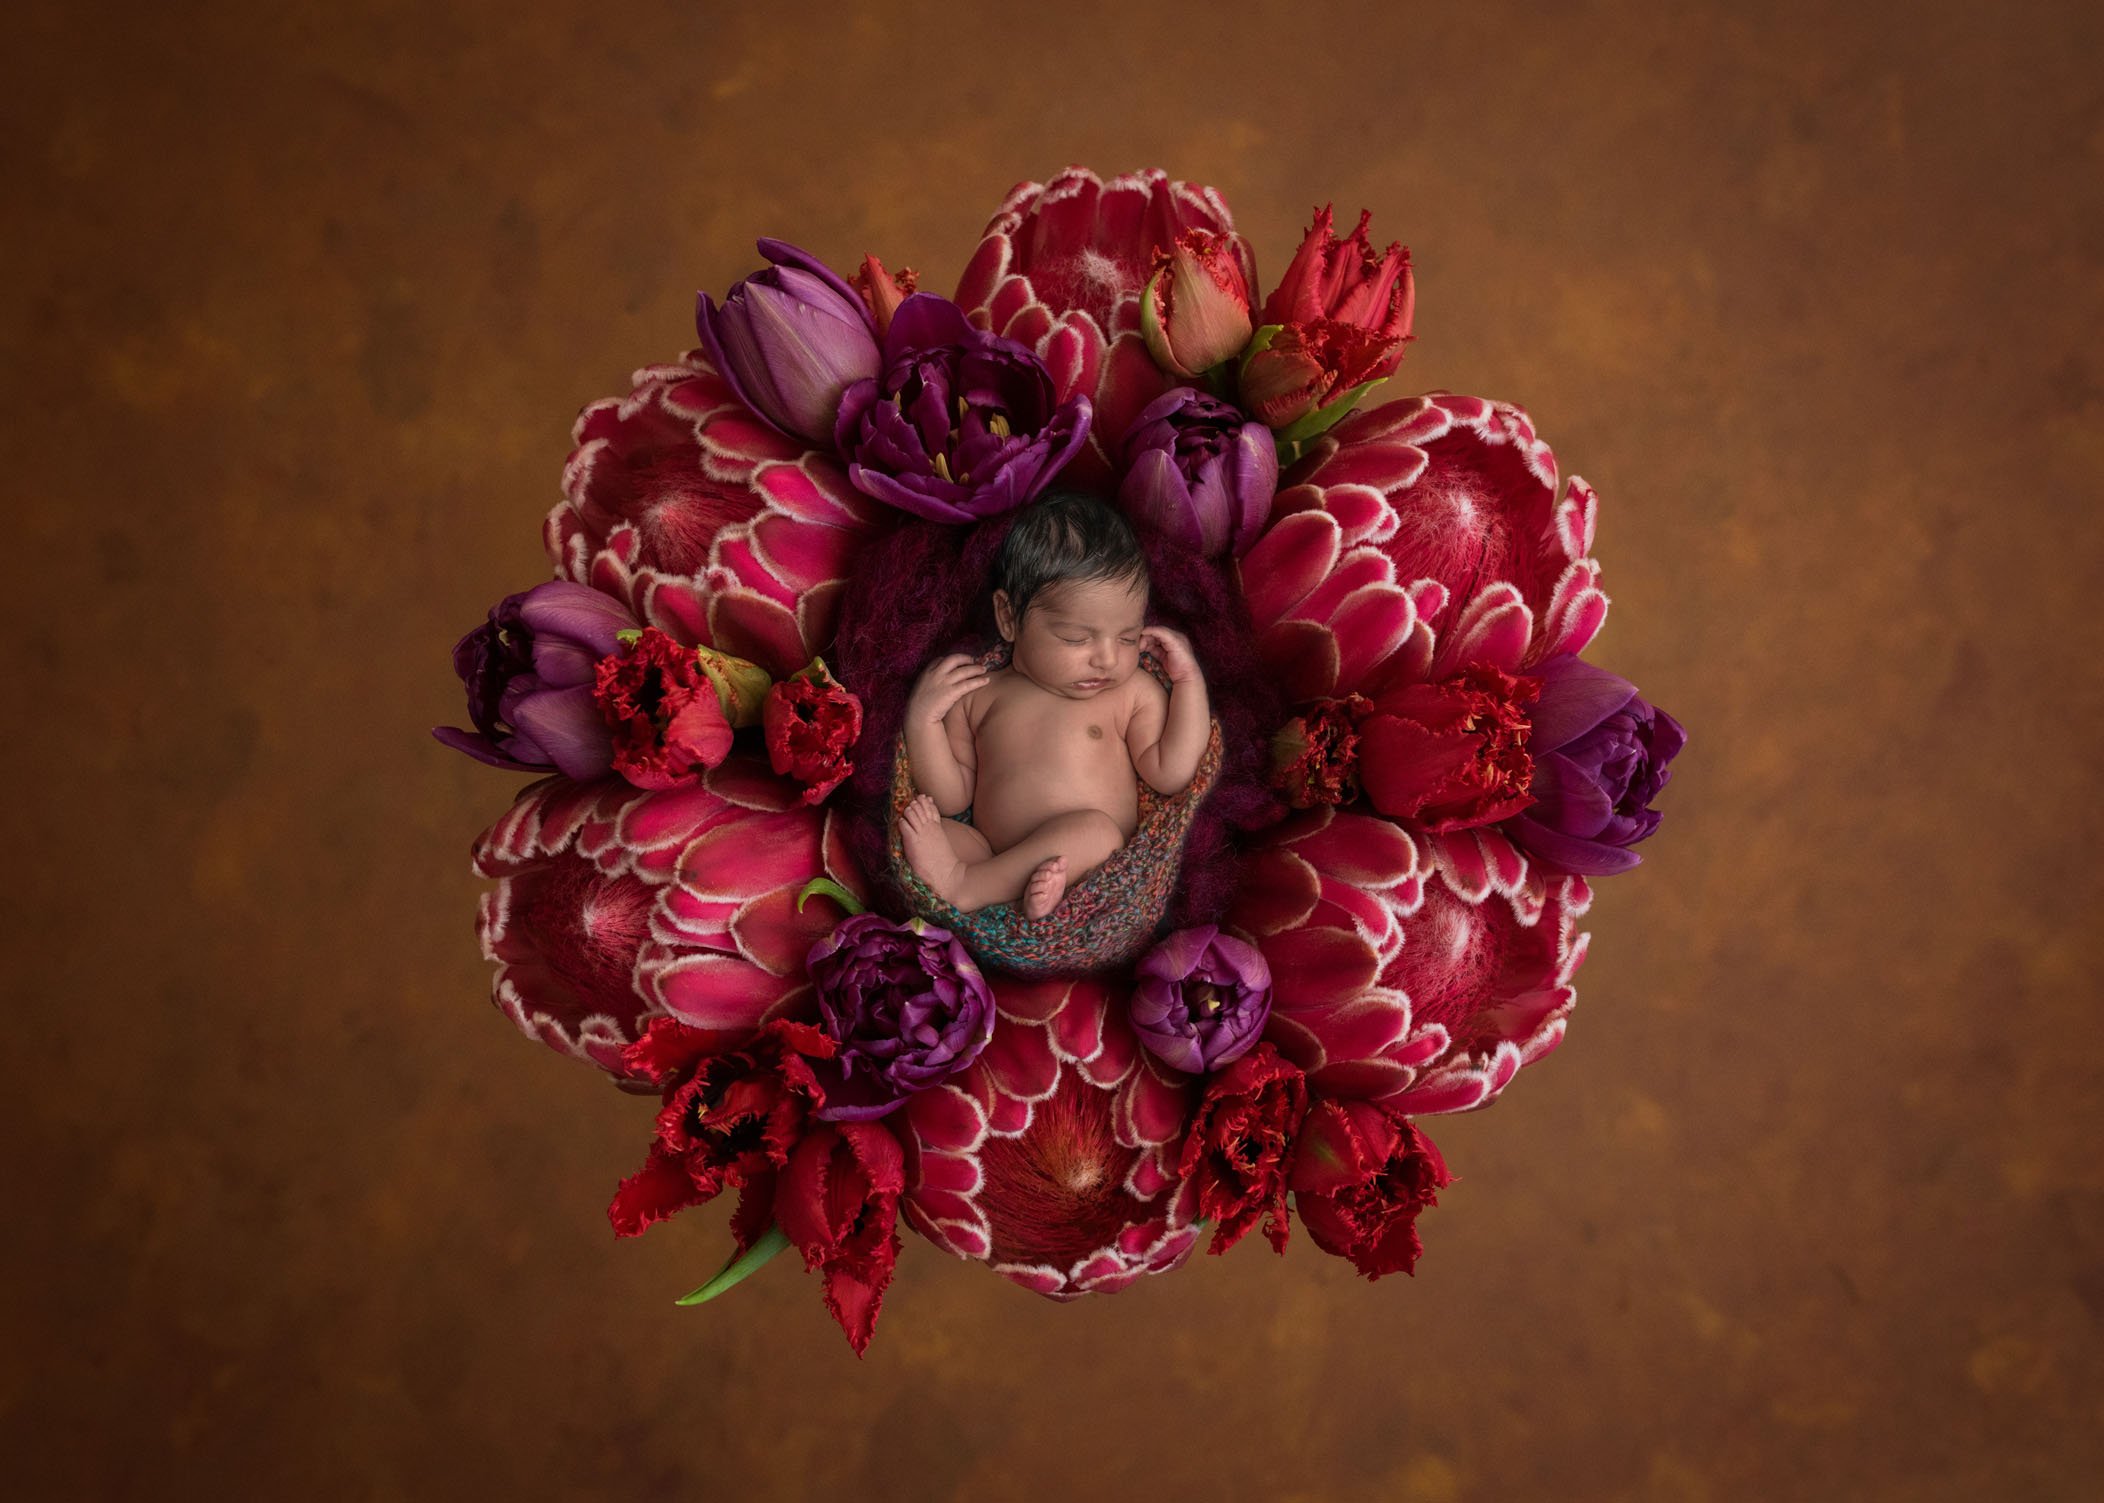 newborn baby sleeping in red and purple floral wreath